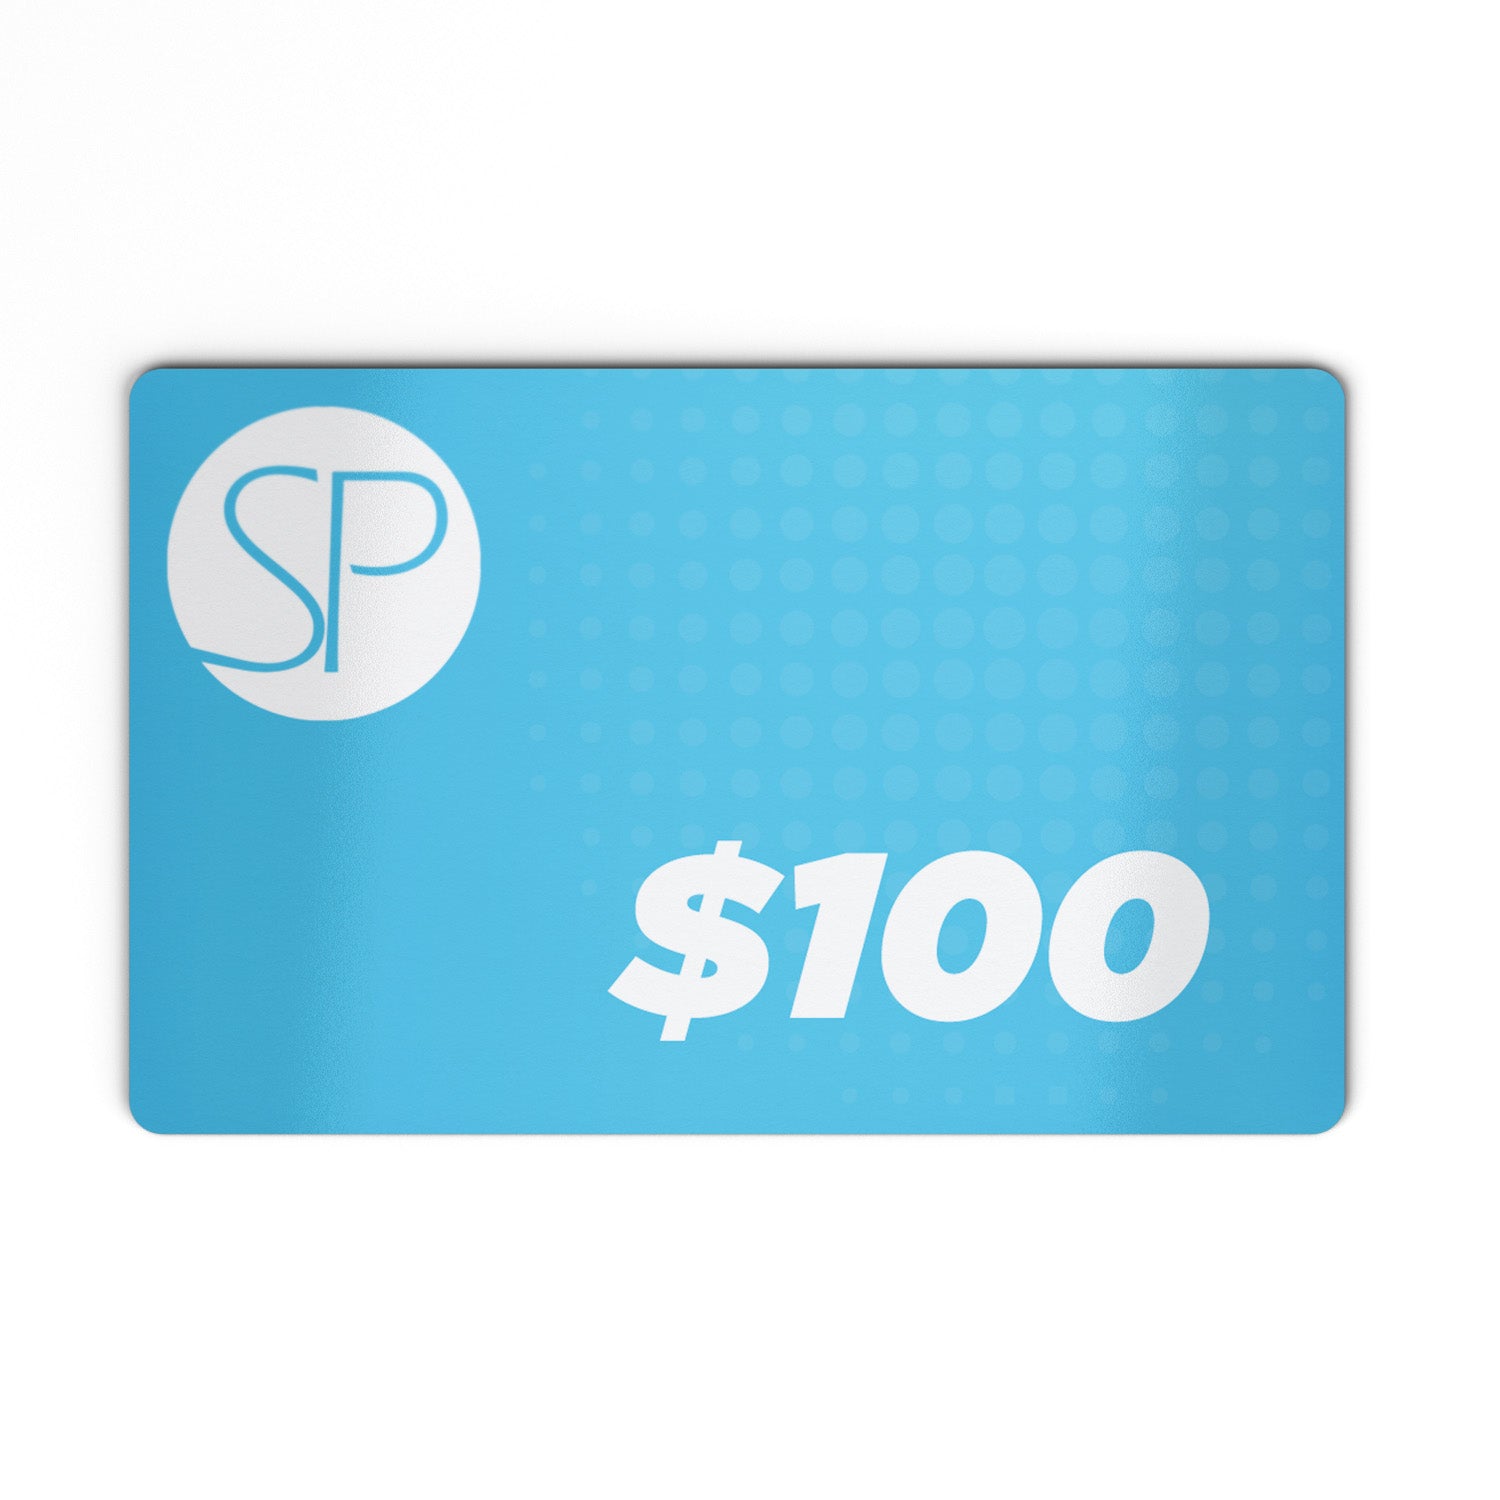 SParms Gift Card